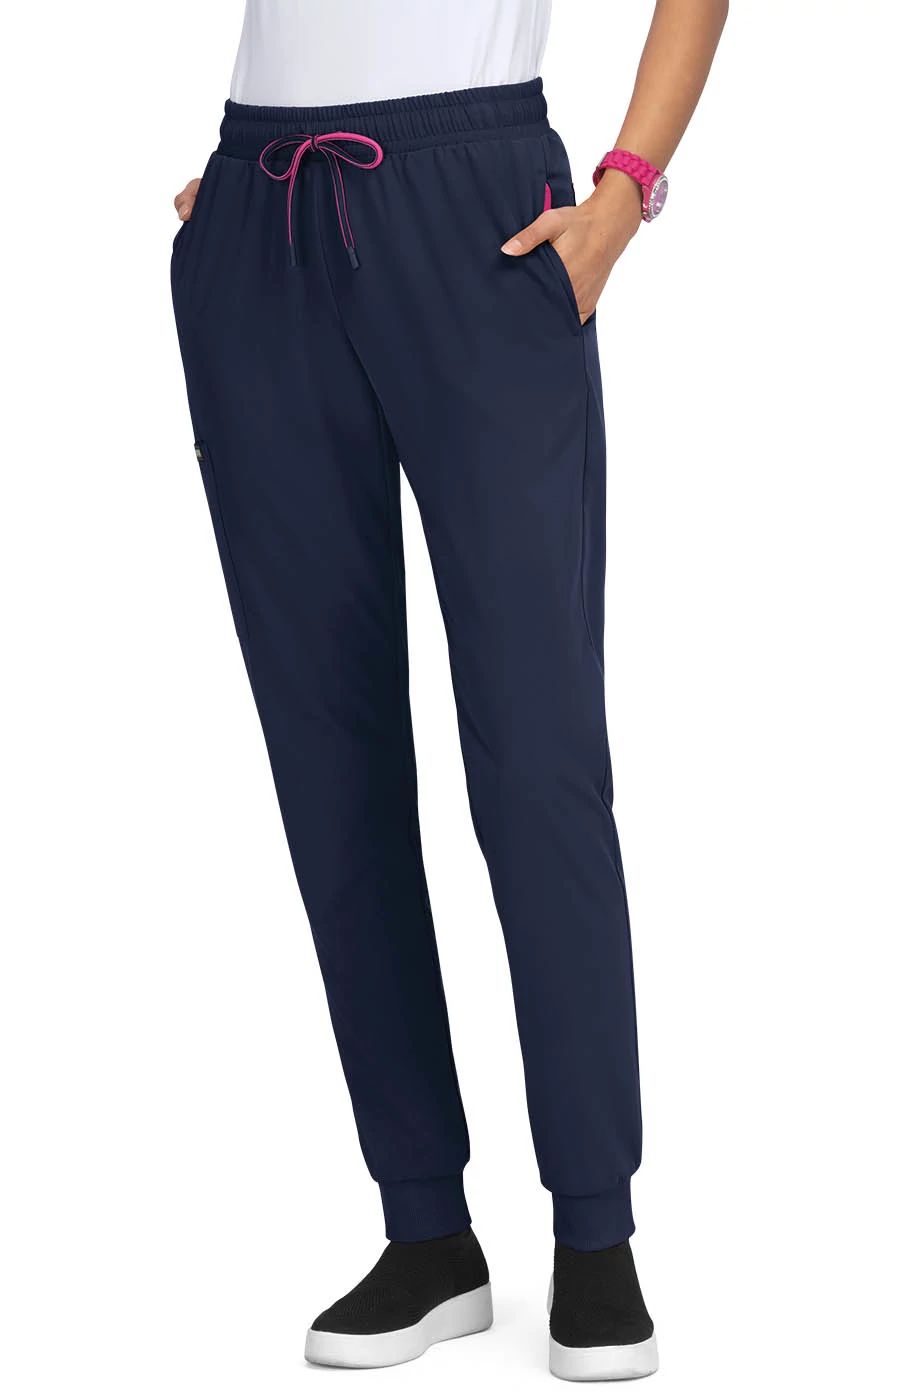 shanelle-jogger-pant-navy